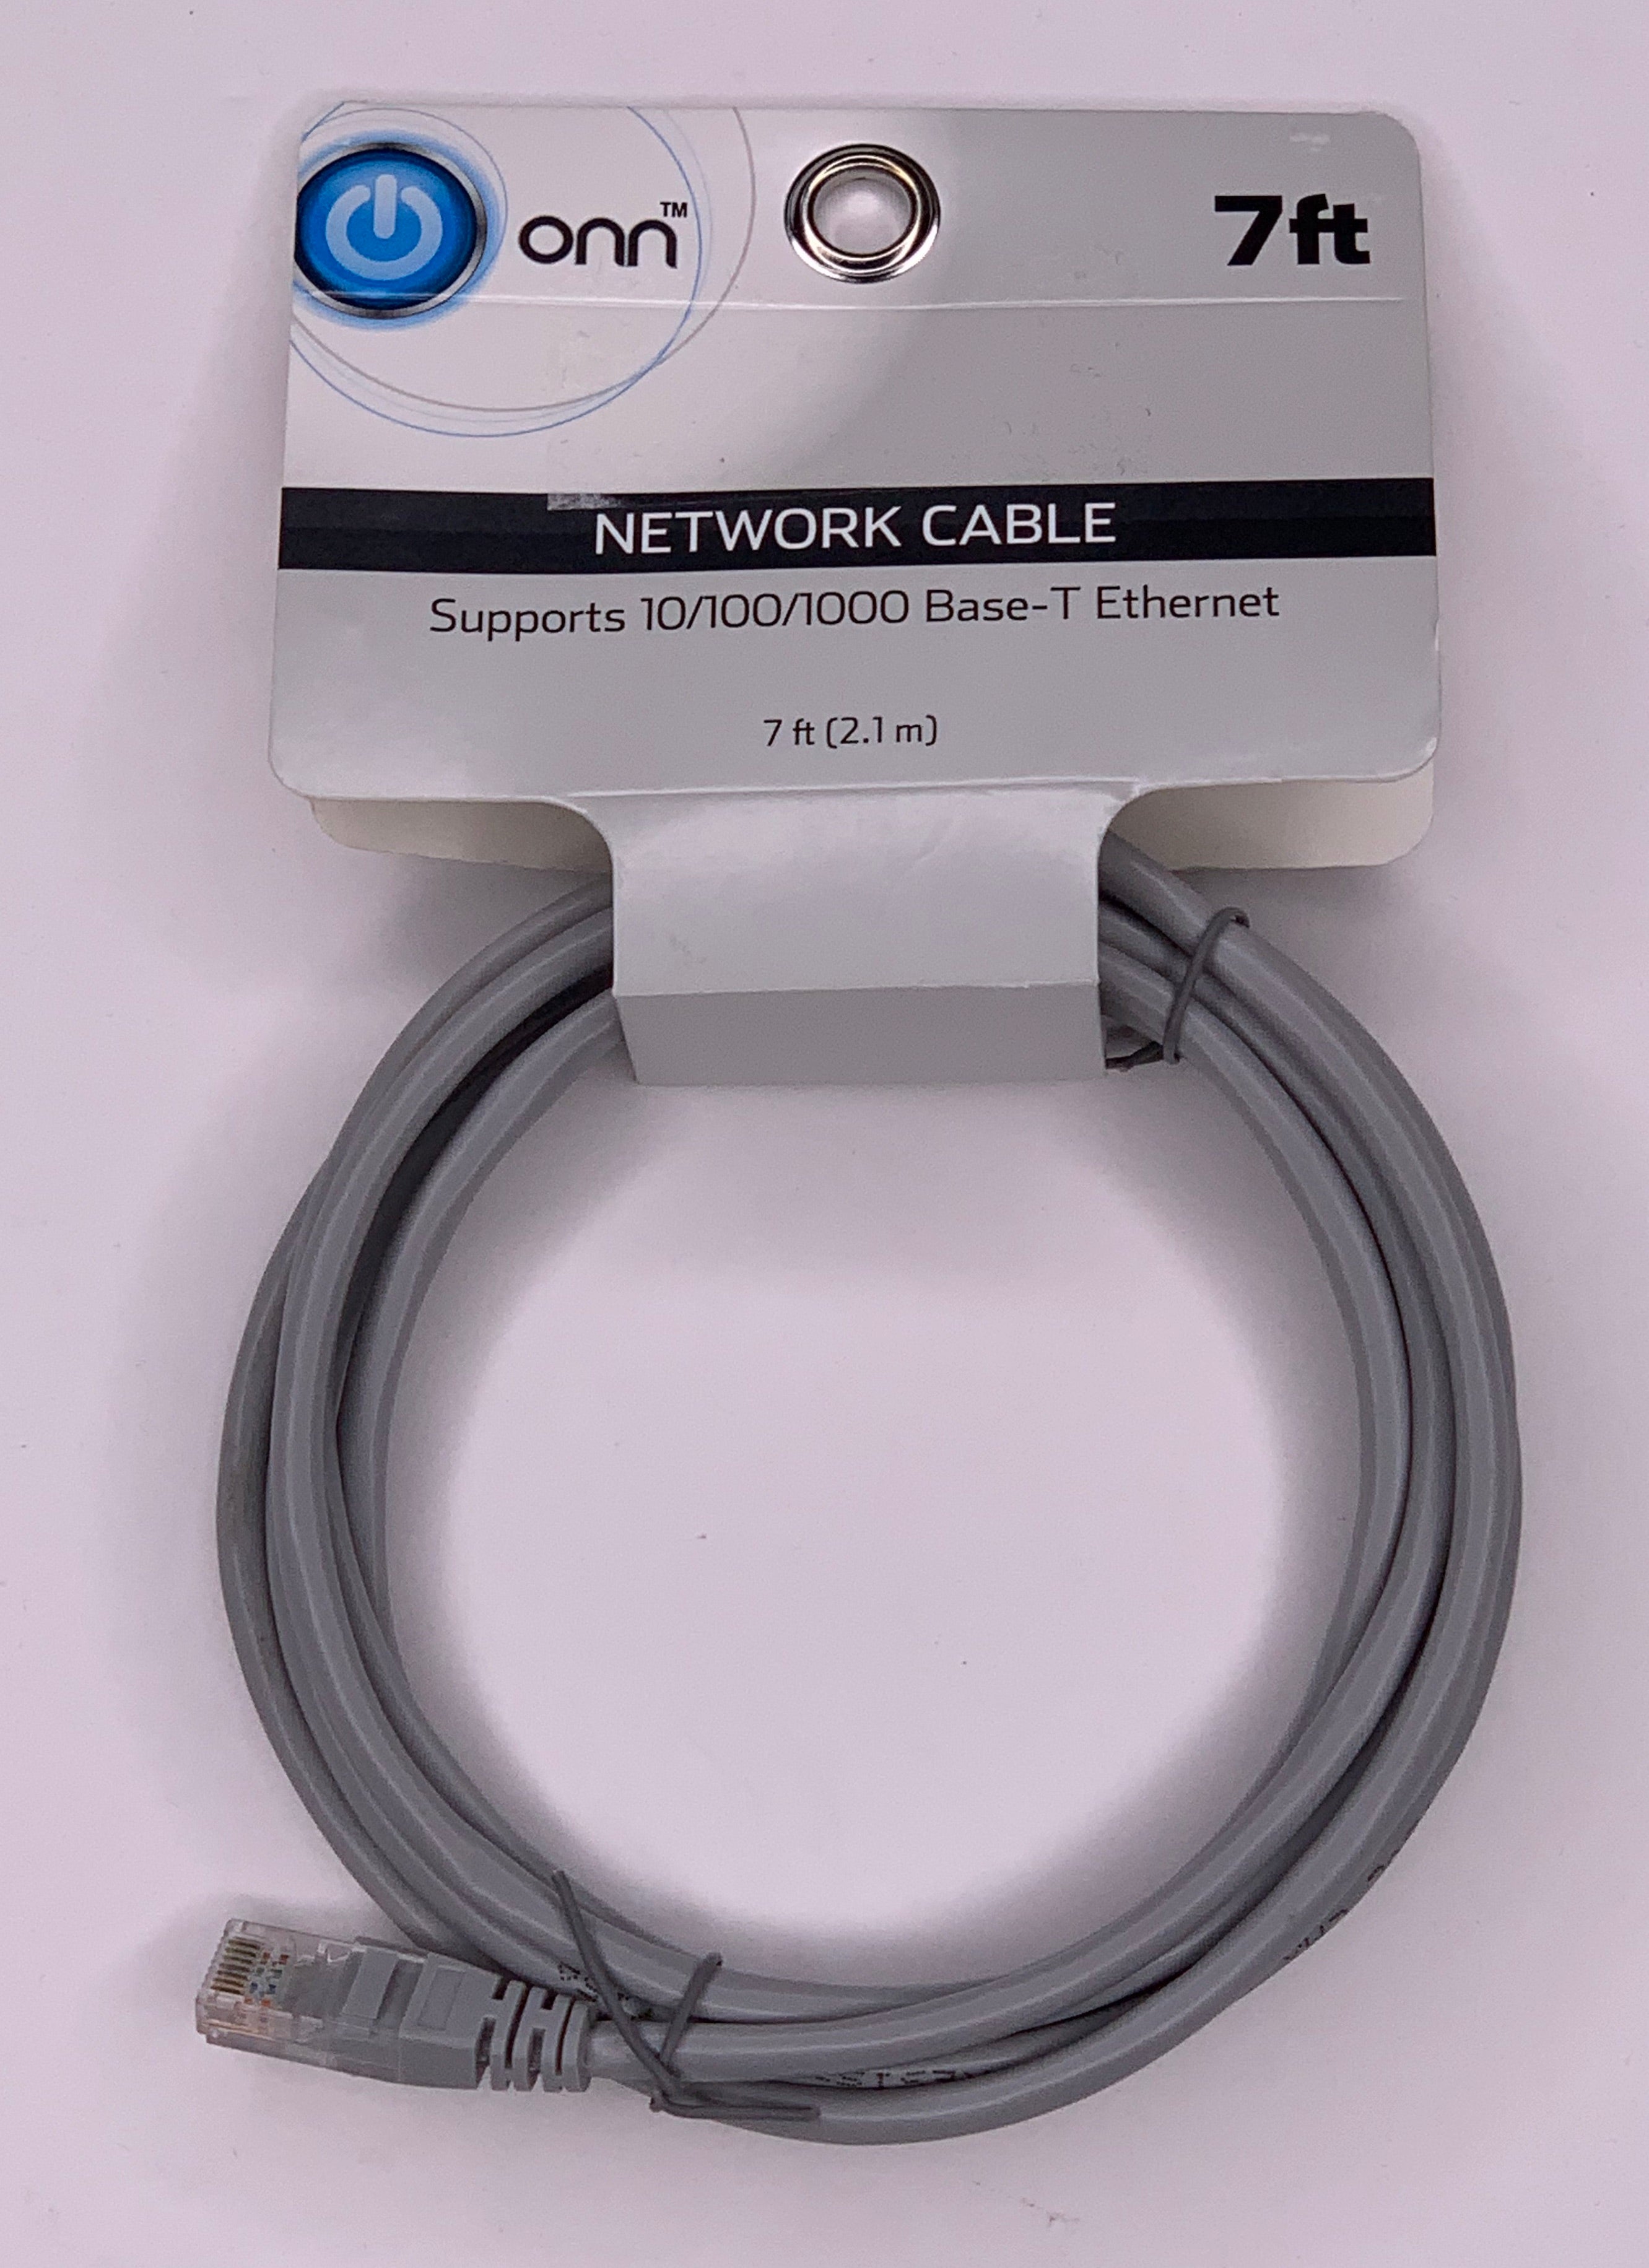 Onn Network 7 ft Cable Supports 10/100/1000 Base-T Ethernet